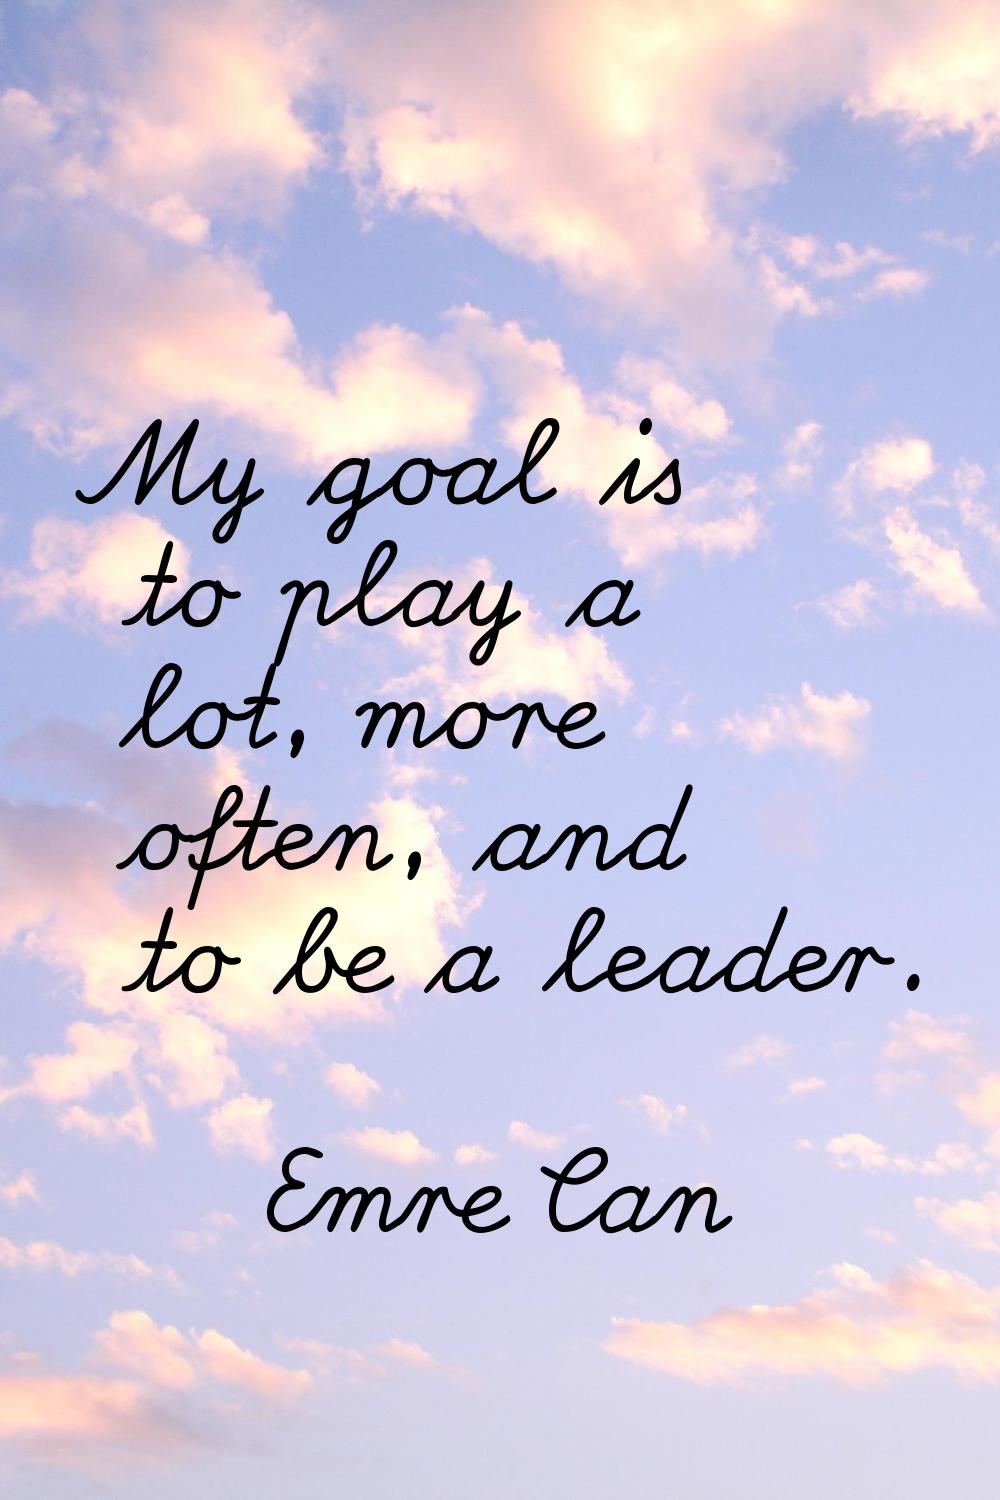 My goal is to play a lot, more often, and to be a leader.